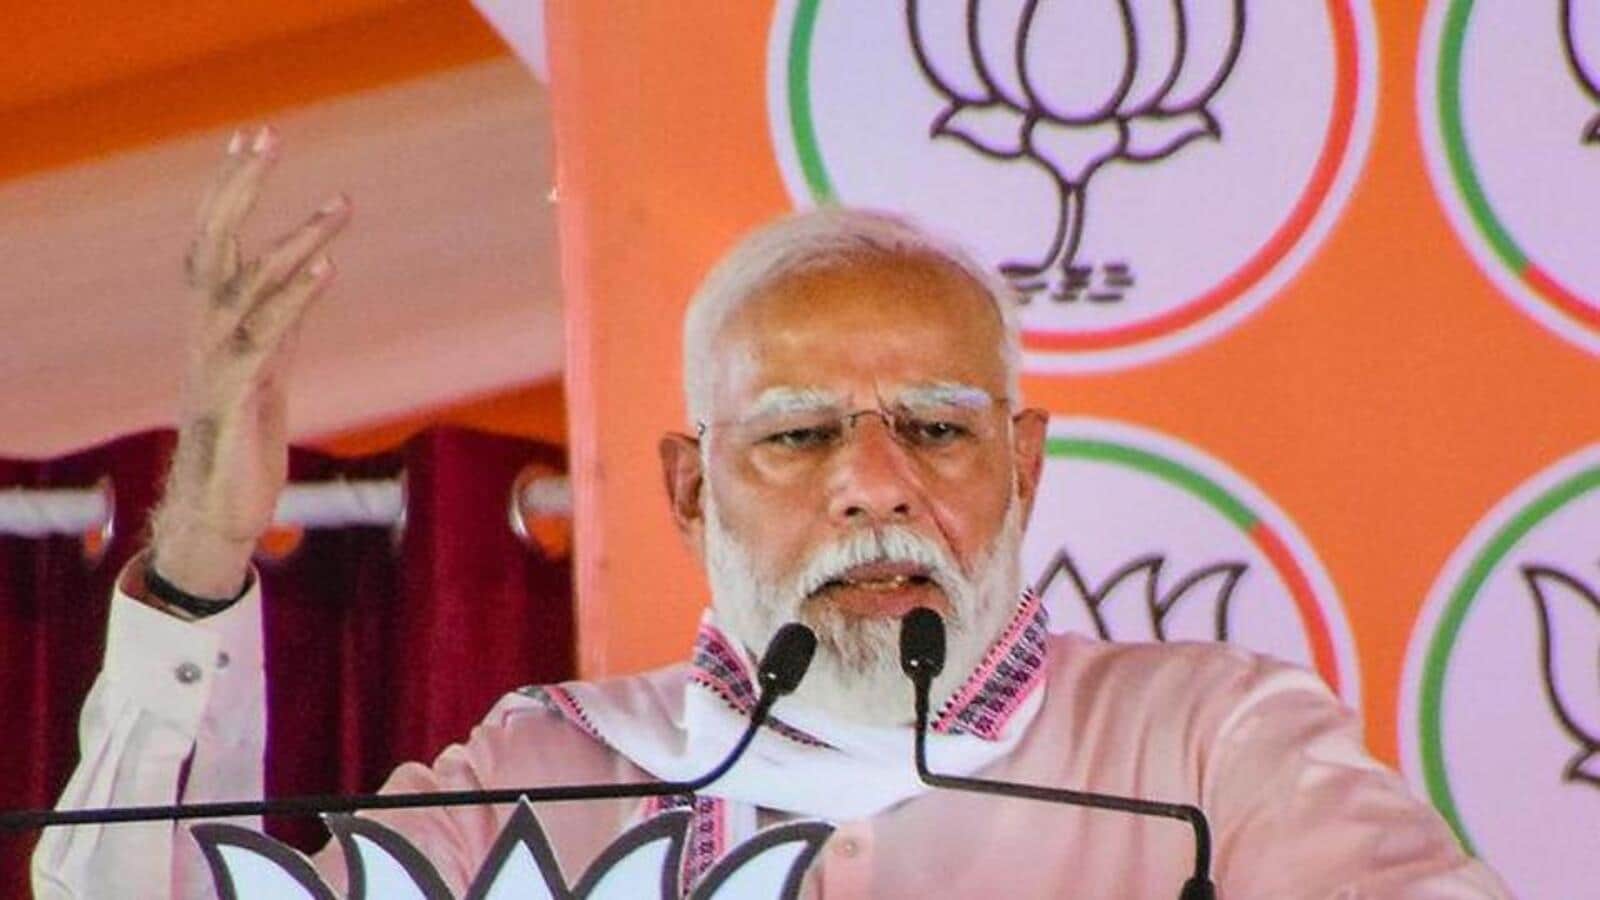 congress-wants-to-snatch-obc-rights-with-religion-based-quota:-pm-modi-in-agra